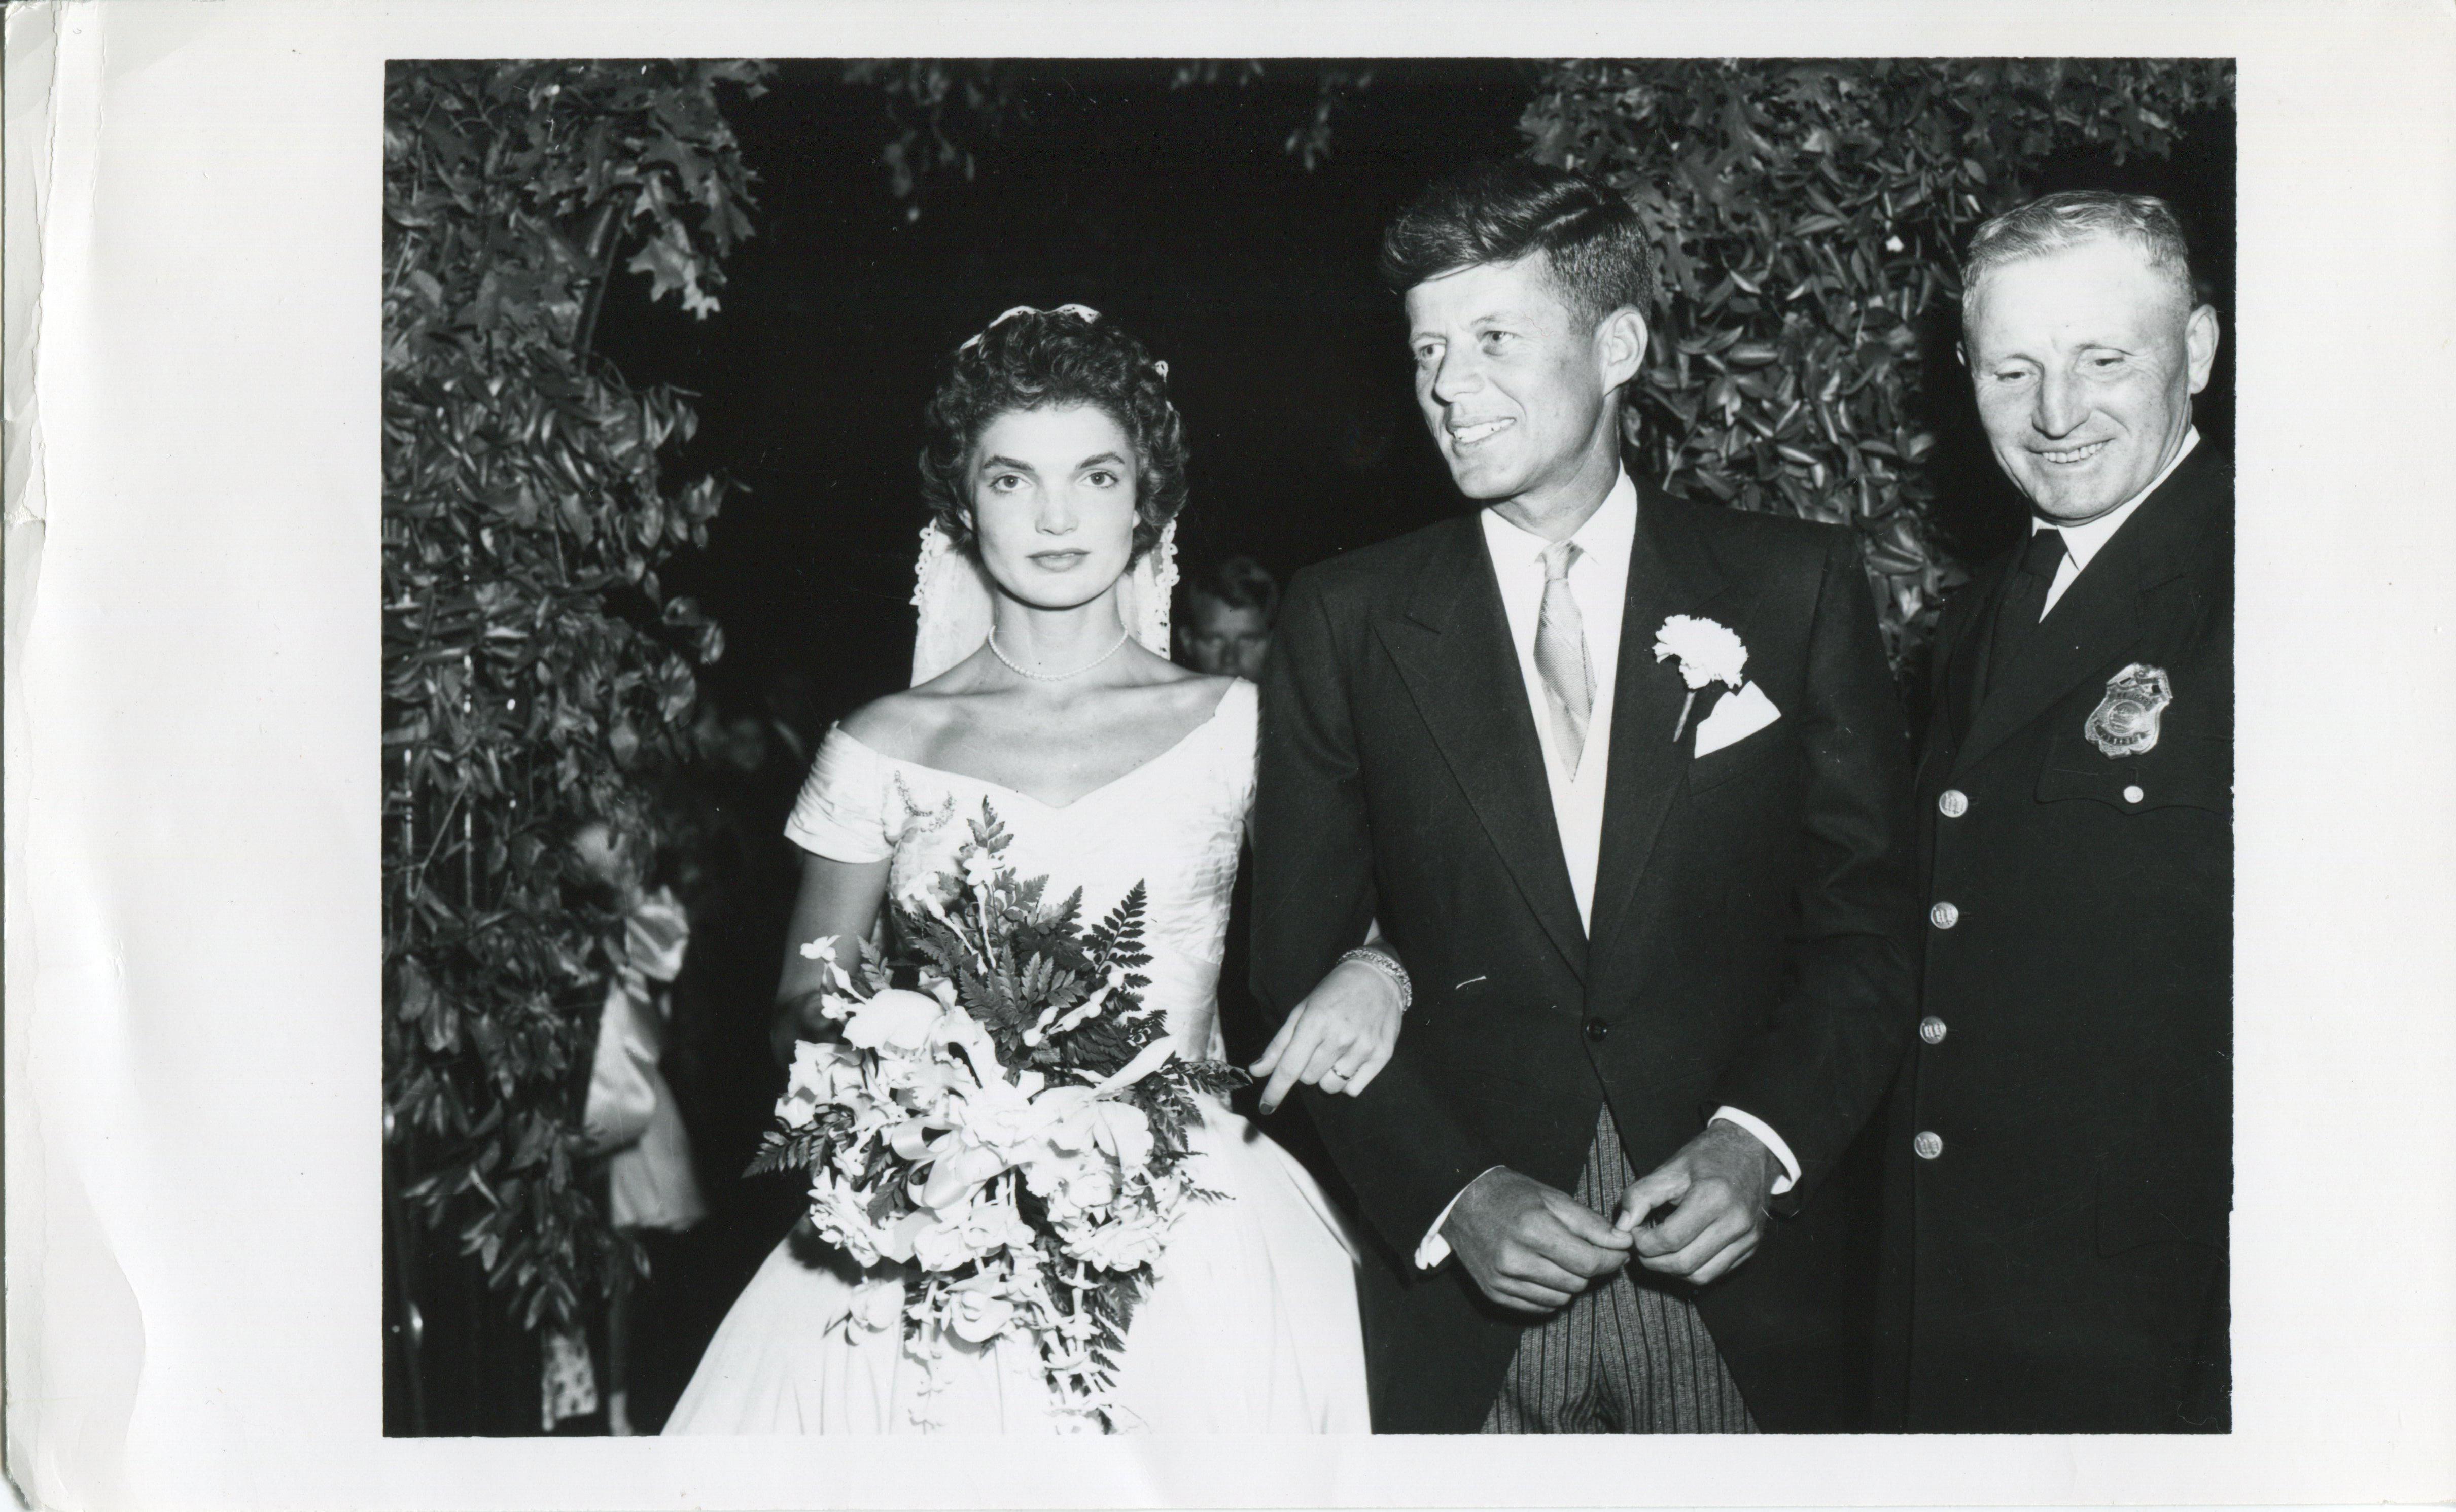 Unknown Black and White Photograph - Wedding John F. Kennedy & Jacqueline Kennedy - Official Press Photo